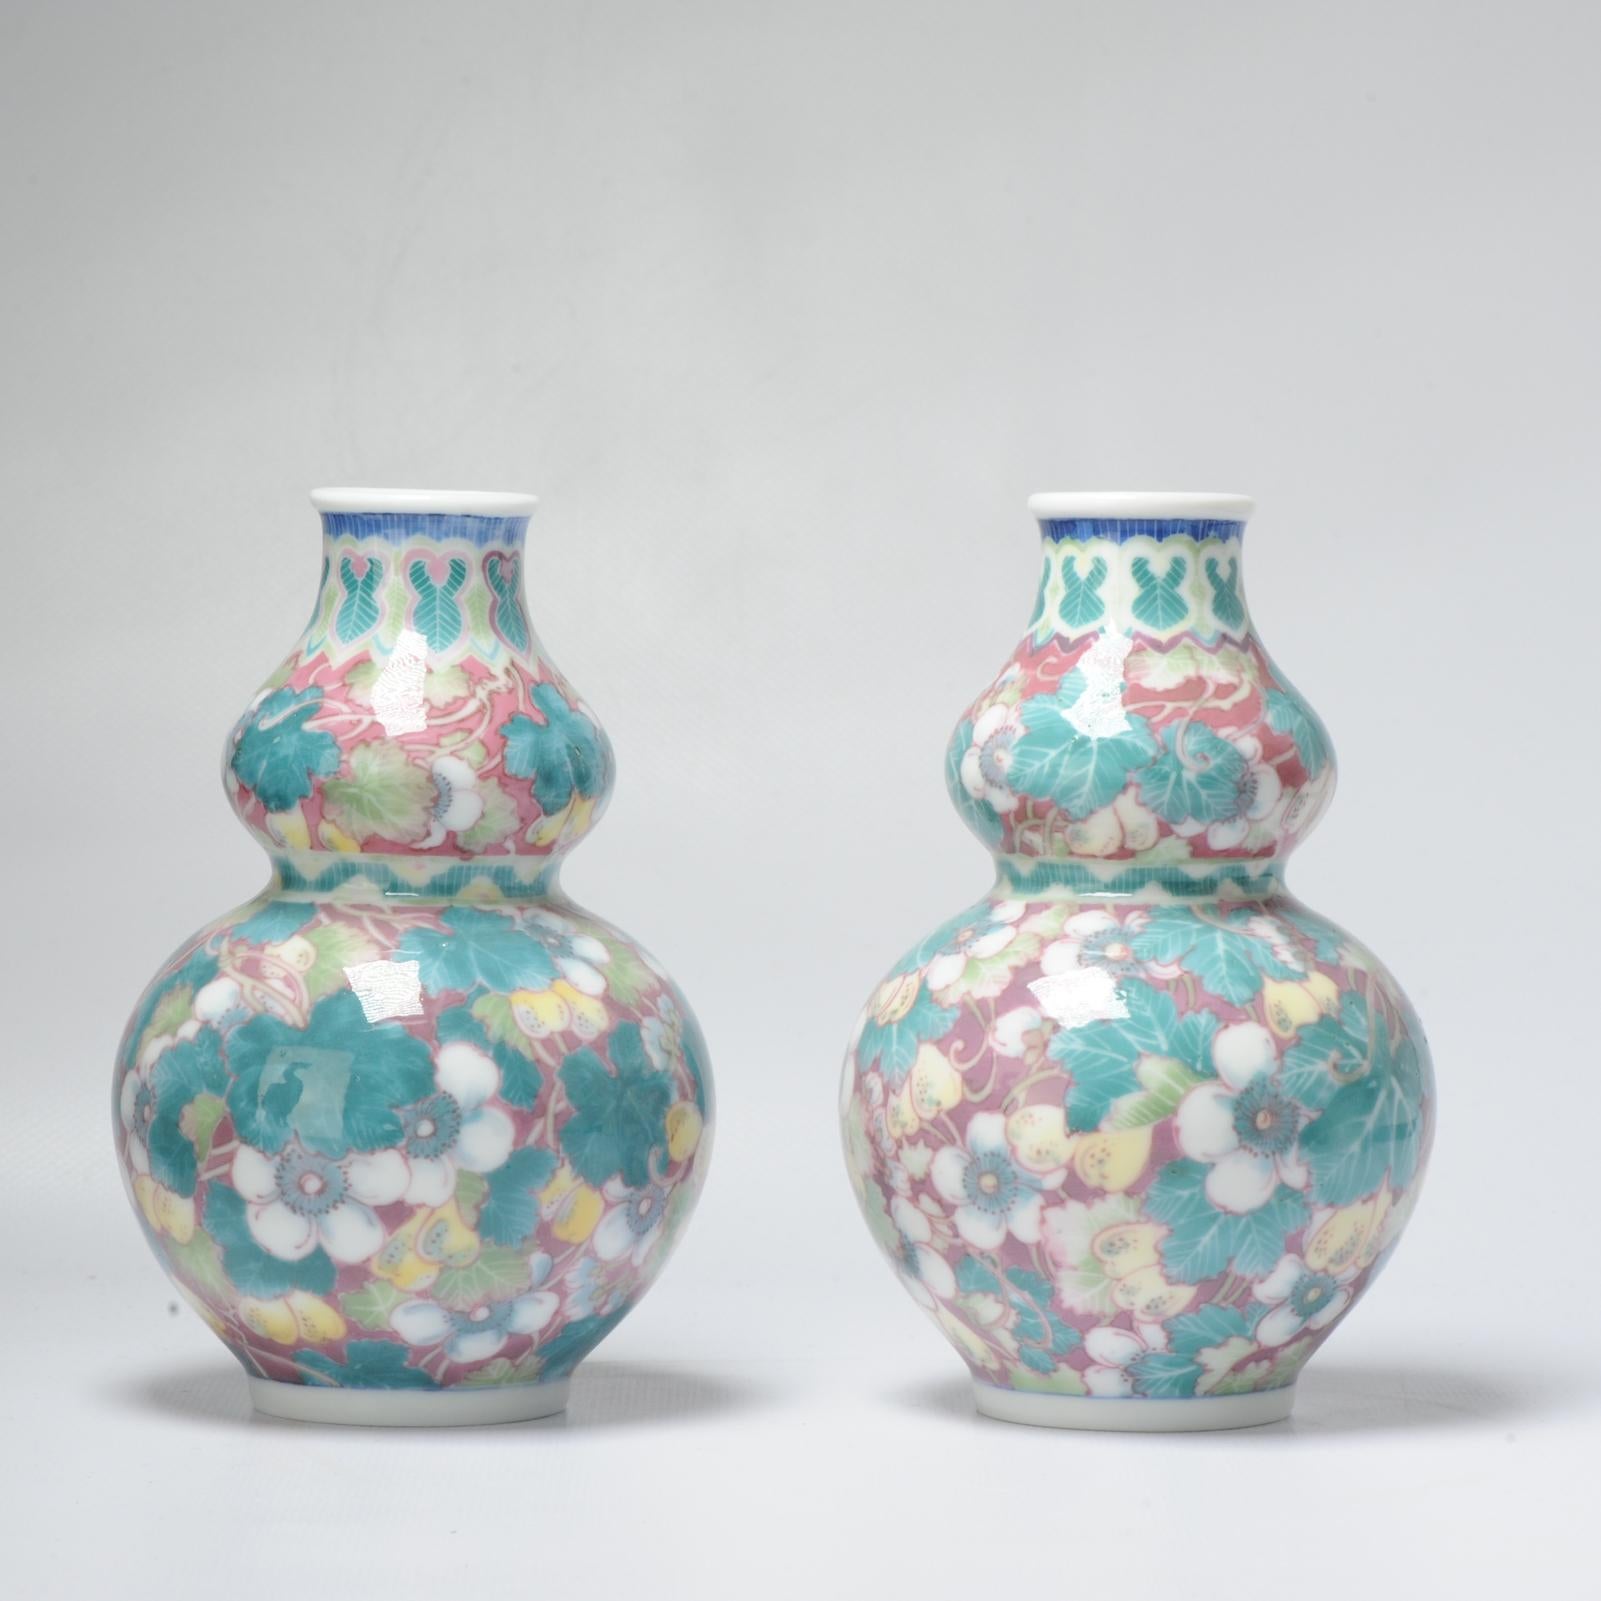 Description

Set of two polychrome porcelain gourd vases, with a decoration of lemons and blossoms. Marked with seal mark Gaoling. China, 20th century.

Condition
Perfect. Size 175x115mm HXD.

Period
20th century PRoC (1949 - now)